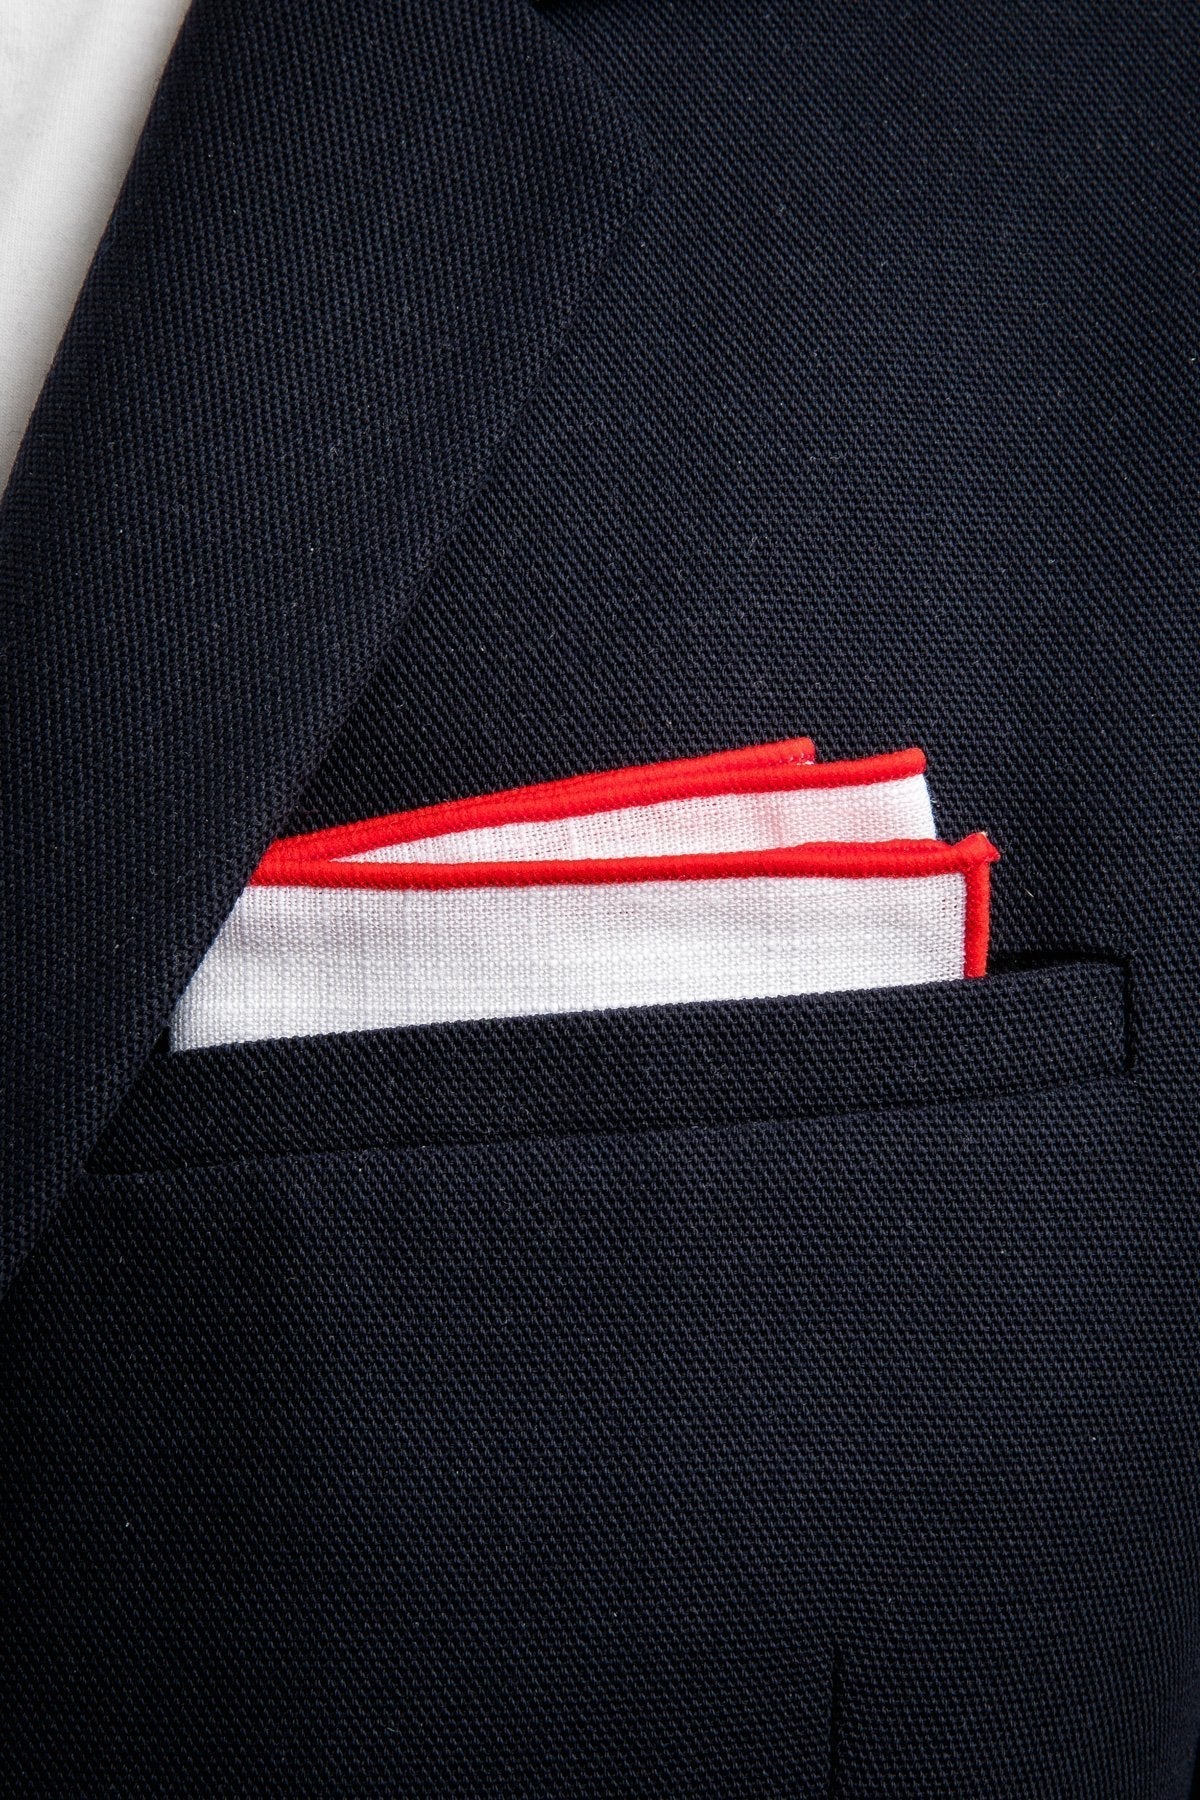 An ivy Pocket square Red Borders